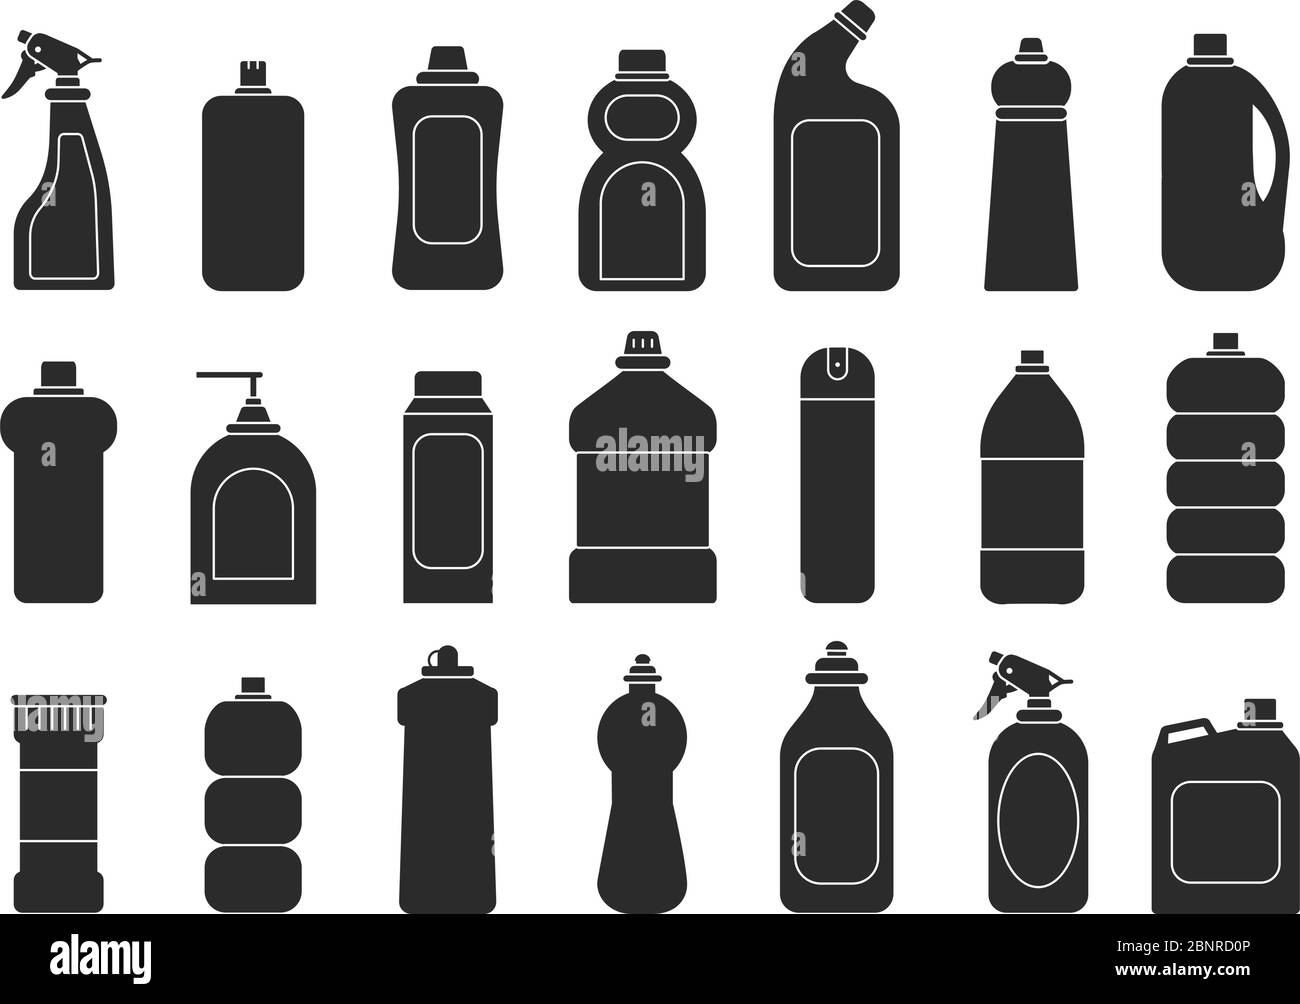 Cleaning bottles silhouettes. Laundry detergent chemical sanitary freshener tools for housework vector illustrations Stock Vector